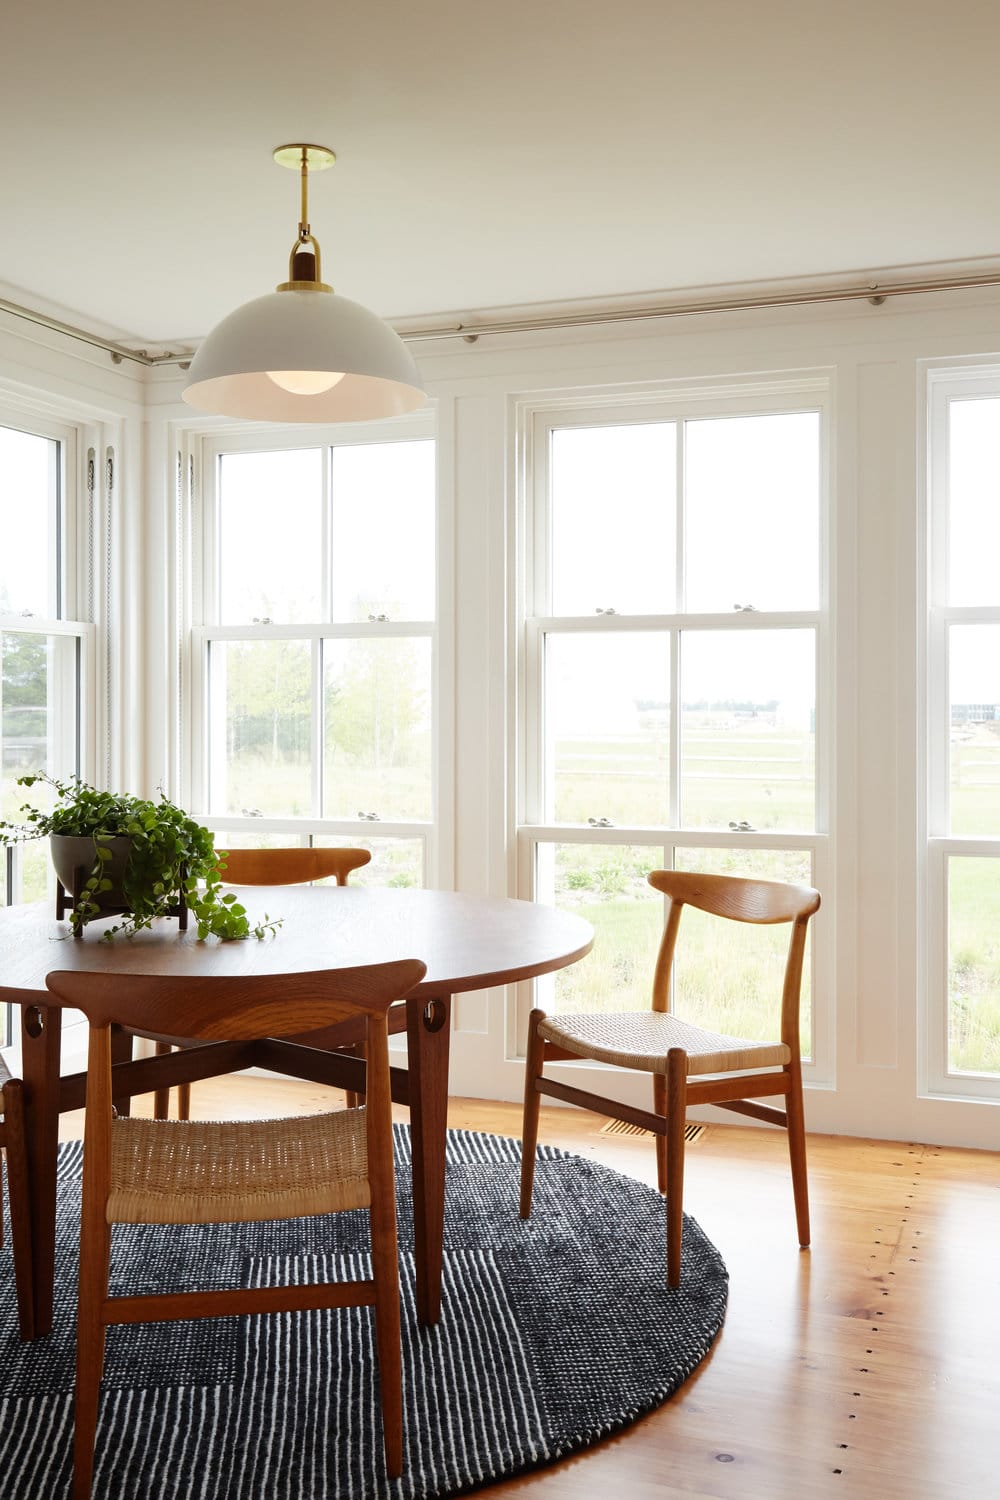 simple casual breakfast nook with mid-century style | modern shaker beach house tour on coco kelley